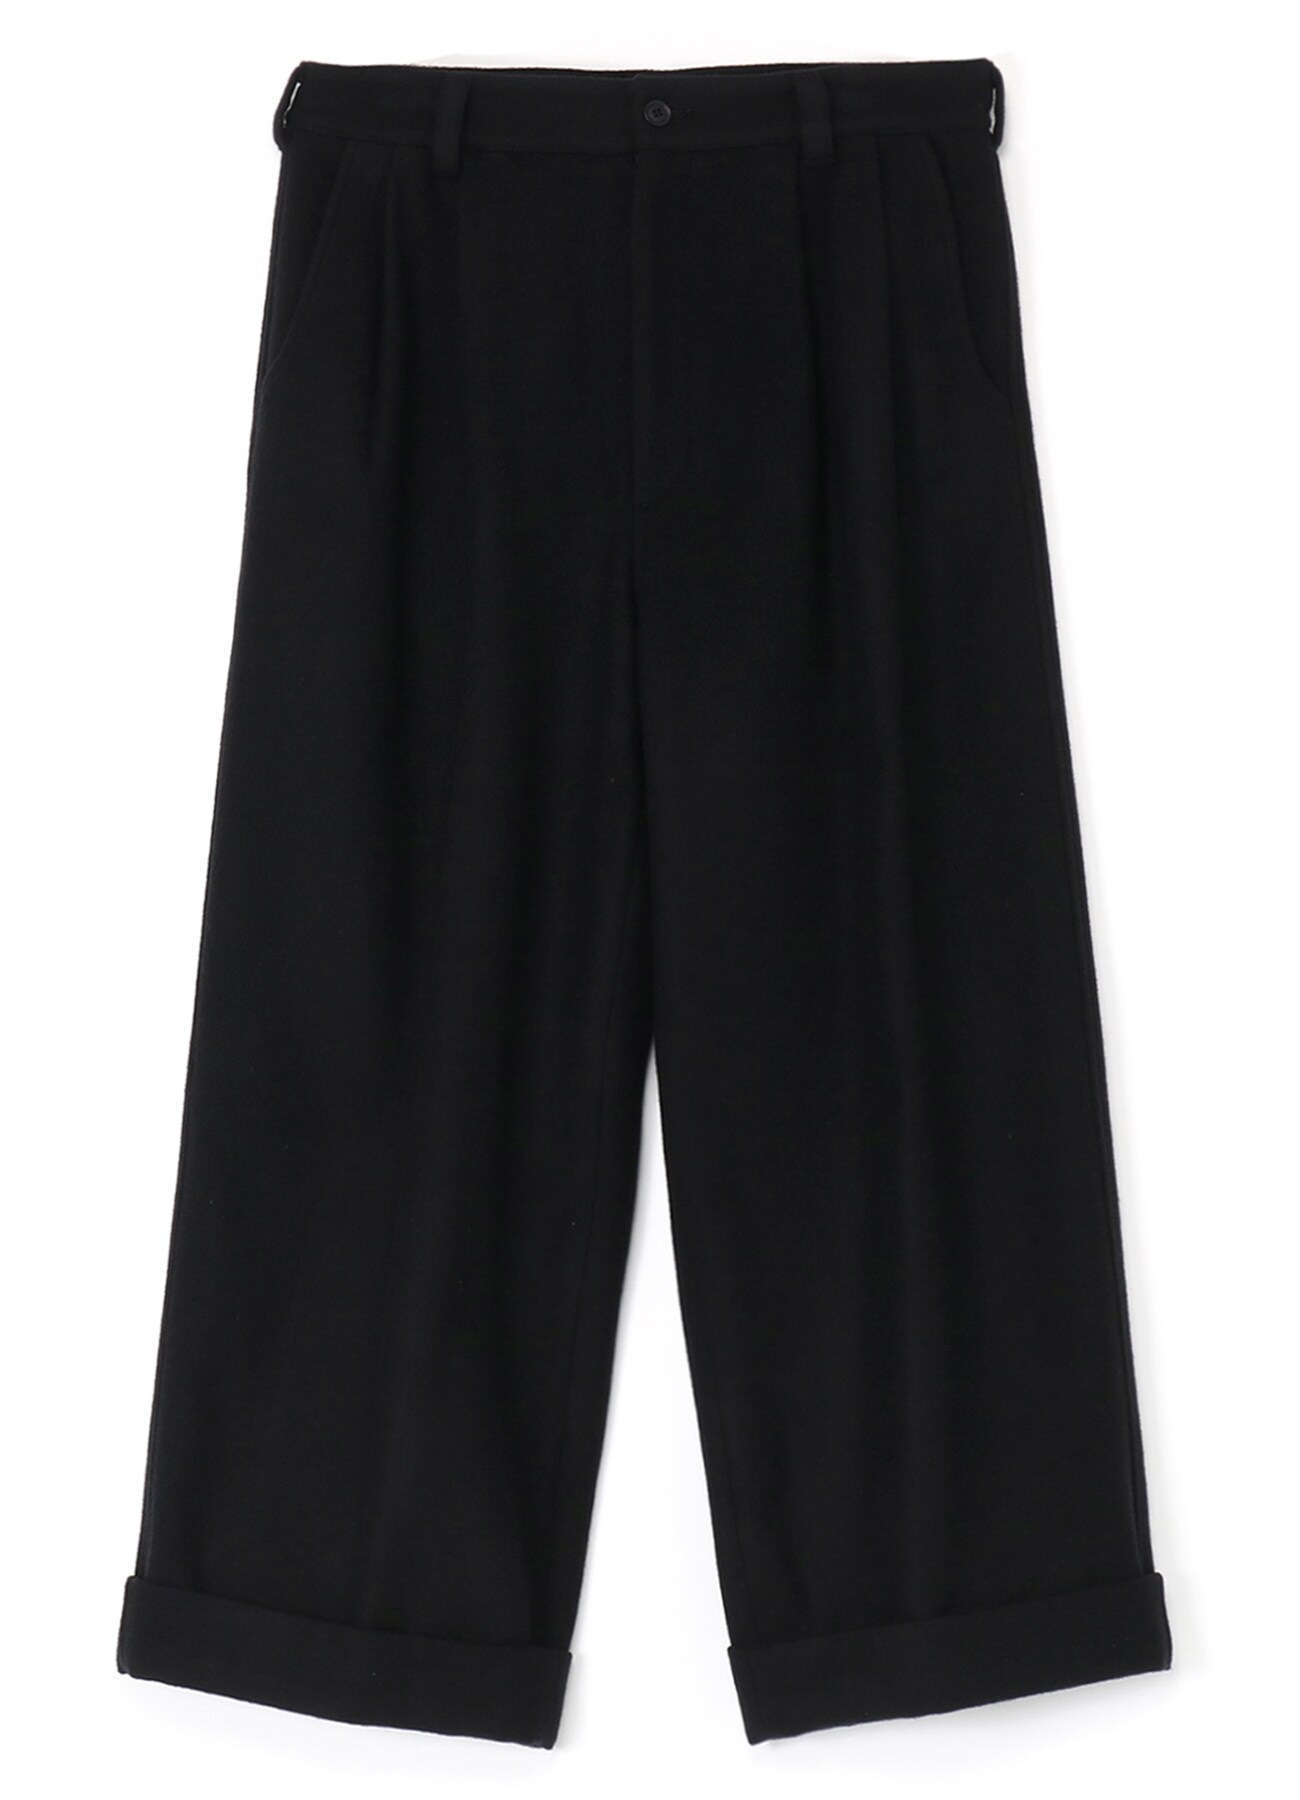 RECYCLED WOOL MELTON 2 TUCK WIDE CUFFED PANTS(XS BLACK): GroundY